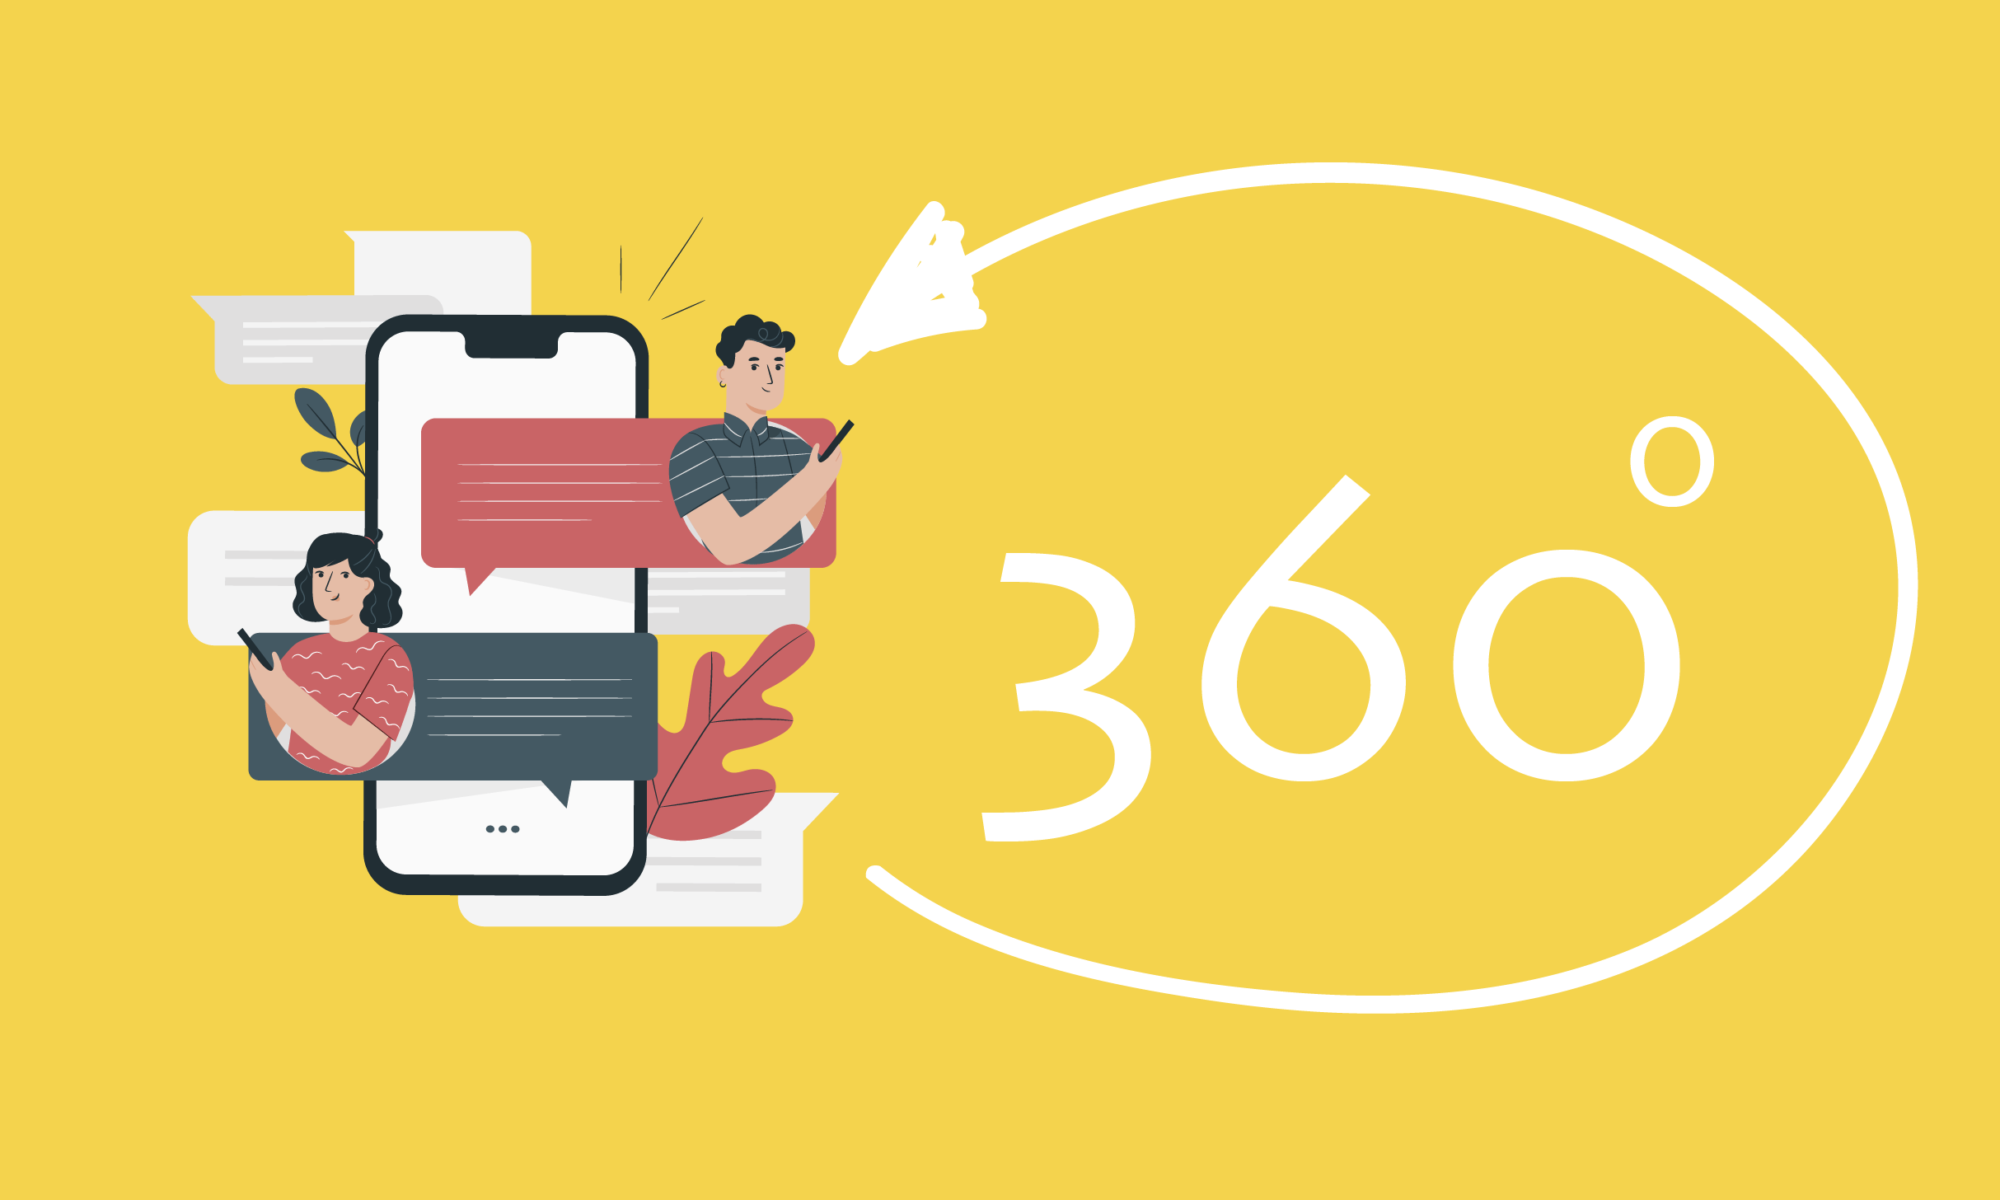 10 Best 360 feedback tools to look for in 2020